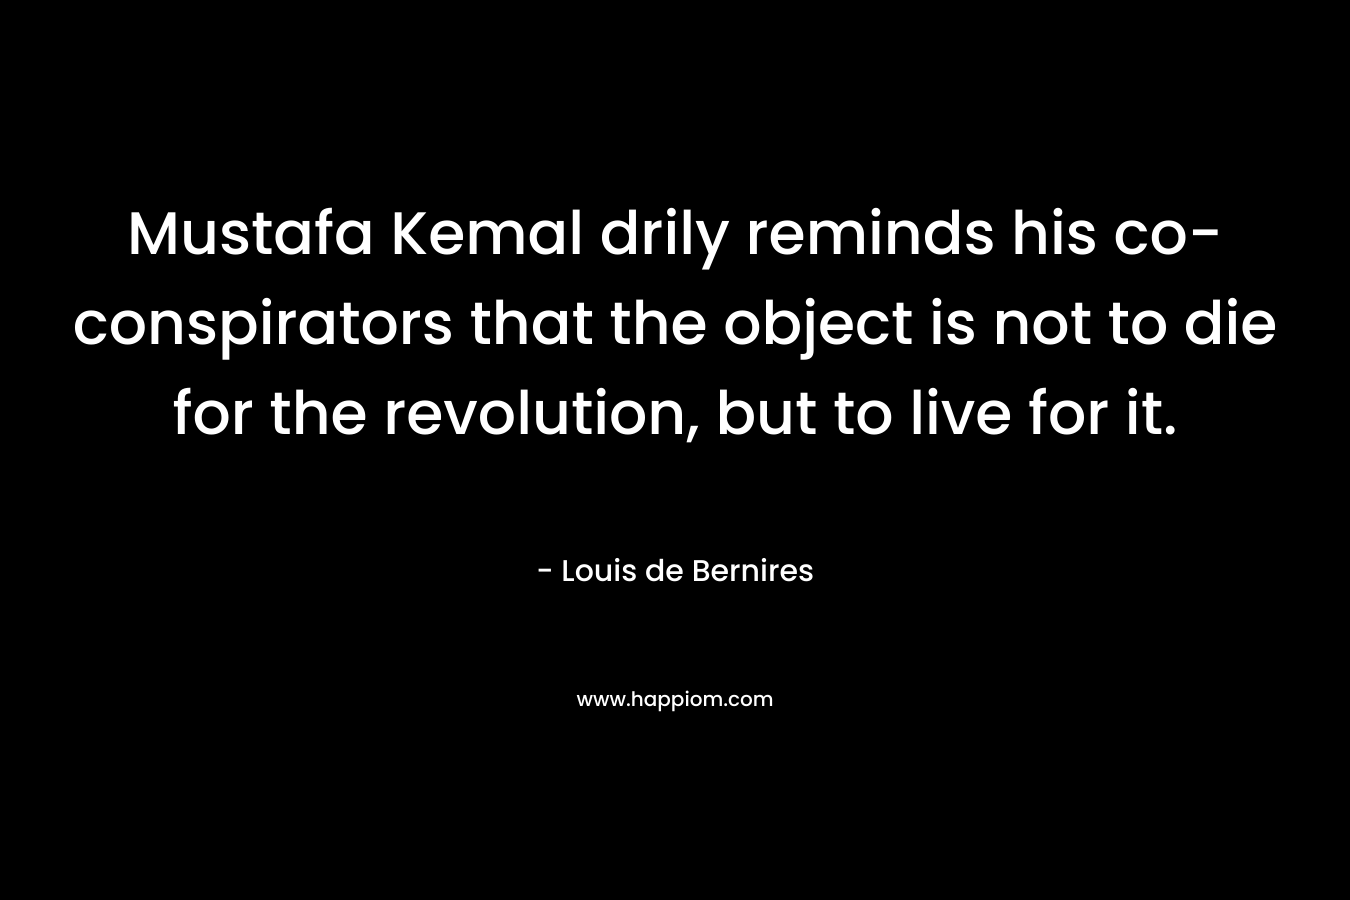 Mustafa Kemal drily reminds his co-conspirators that the object is not to die for the revolution, but to live for it. – Louis de Bernires